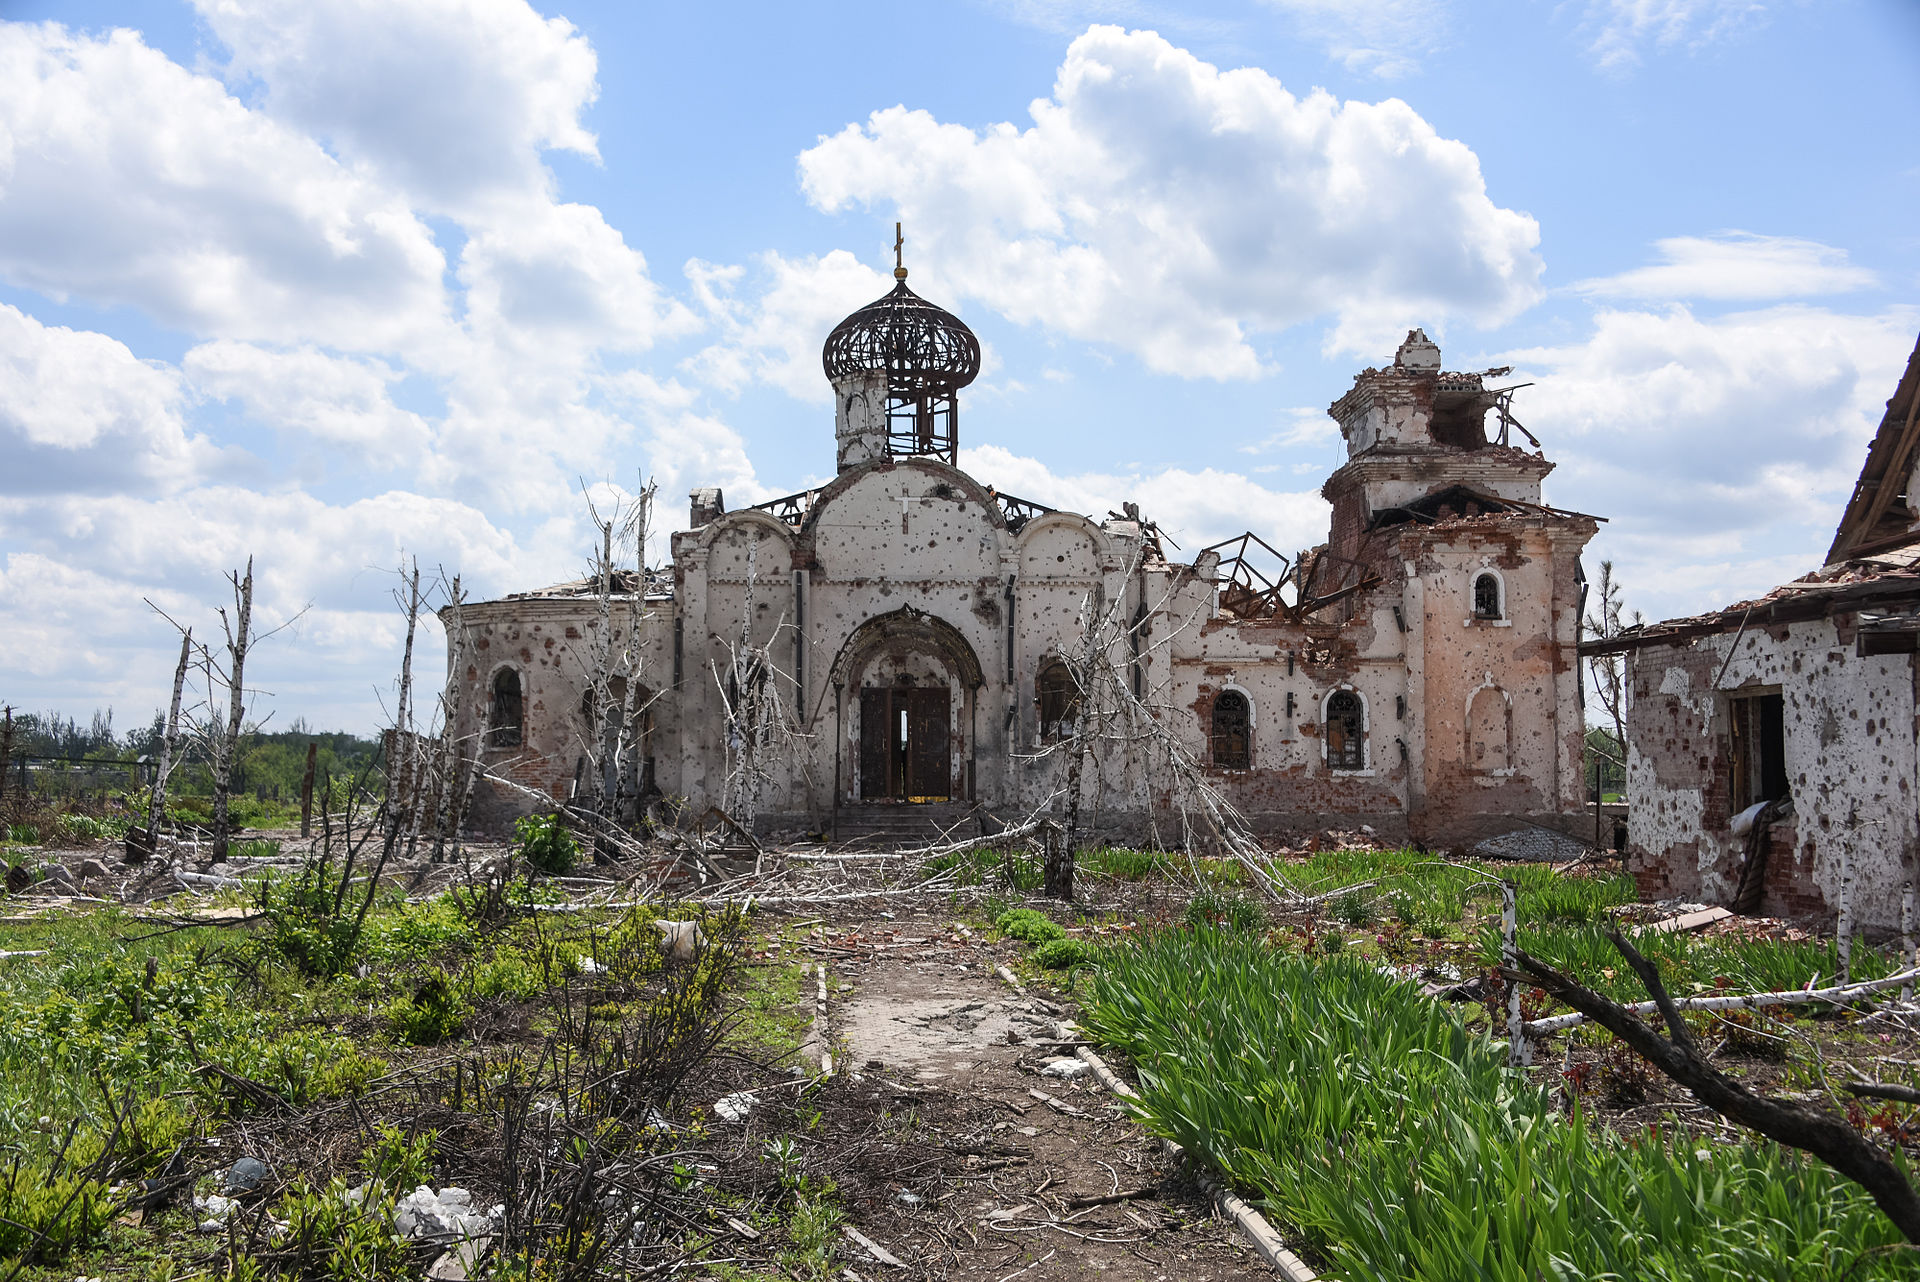 What the war has done to the Iversky monastery. A war of choice triggered by Western intrigues and plots against Russia. (Wiki photo CC)